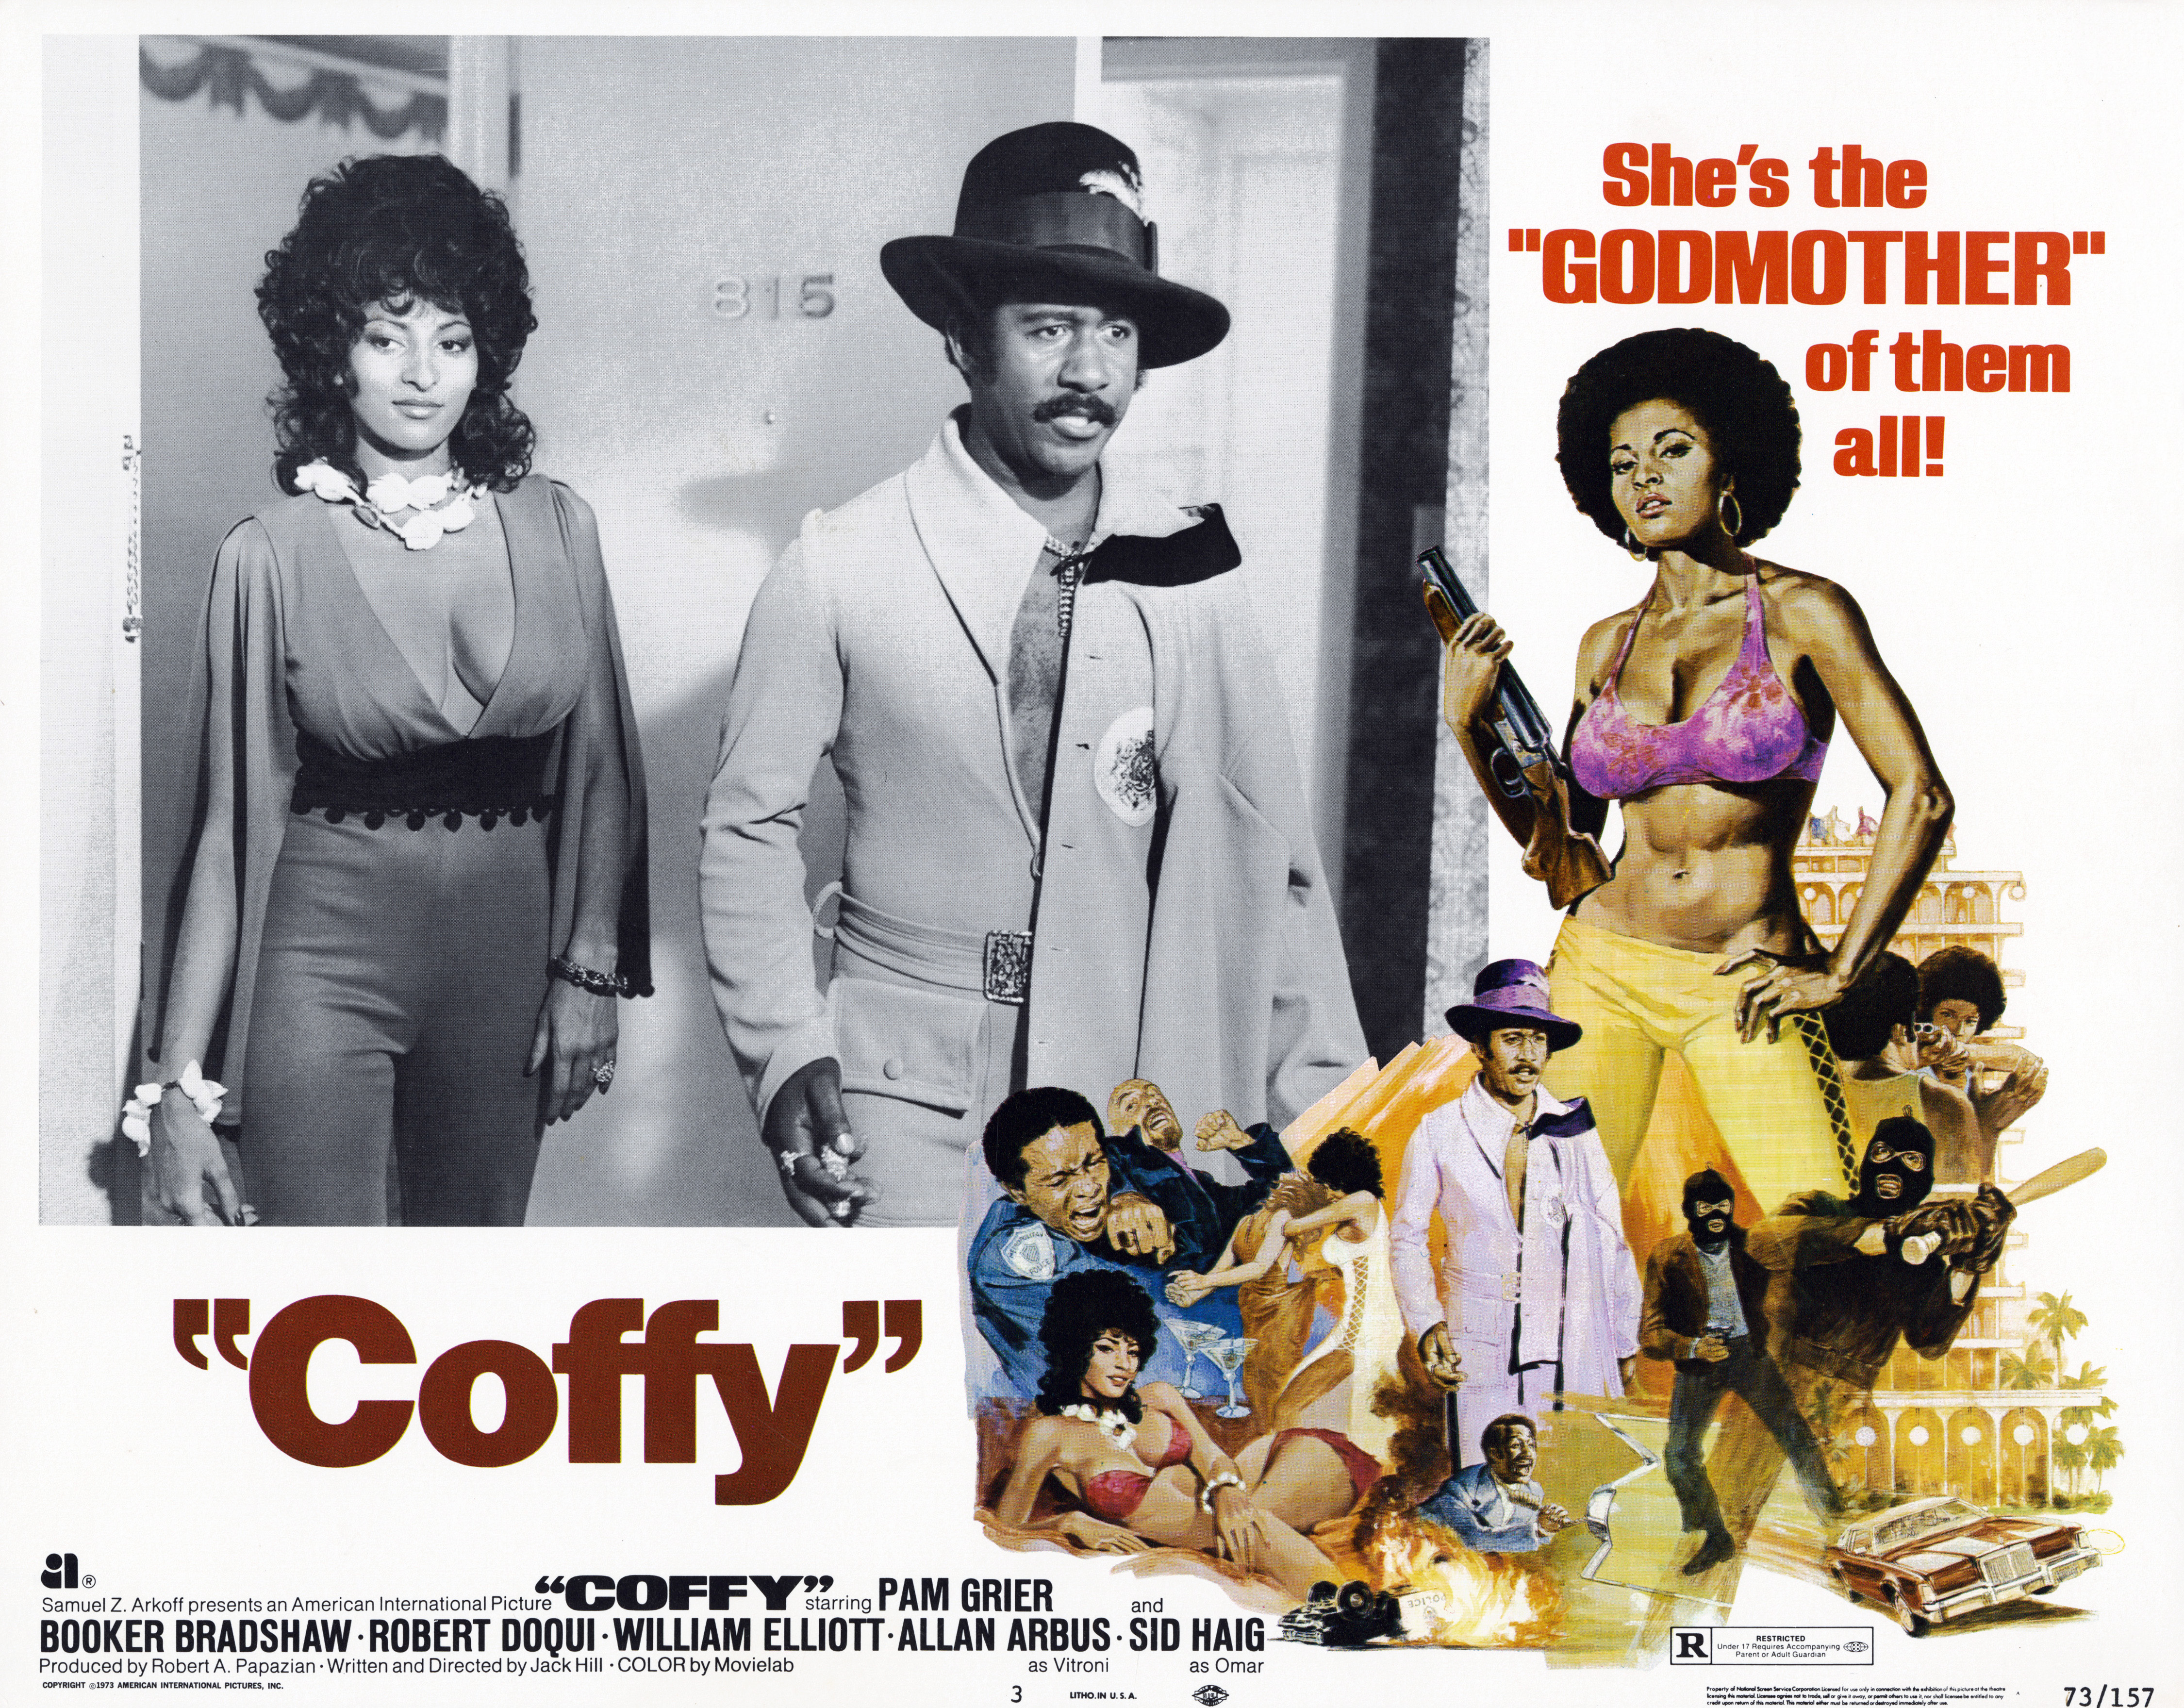 This is the lobby card from Coffy.